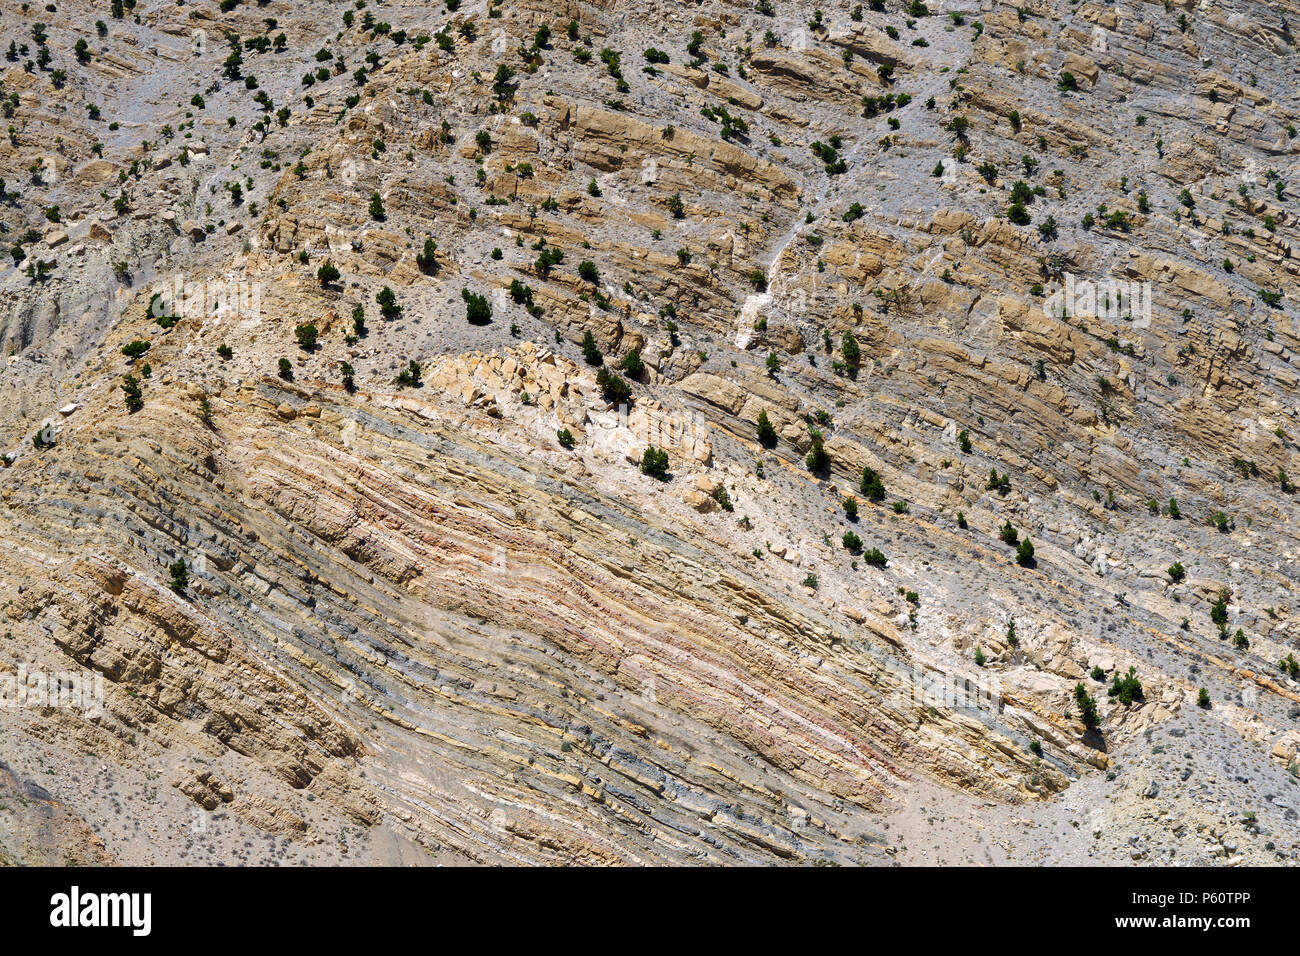 Colorful stratified rock dotted with trees, Mustang region, Nepal. Stock Photo